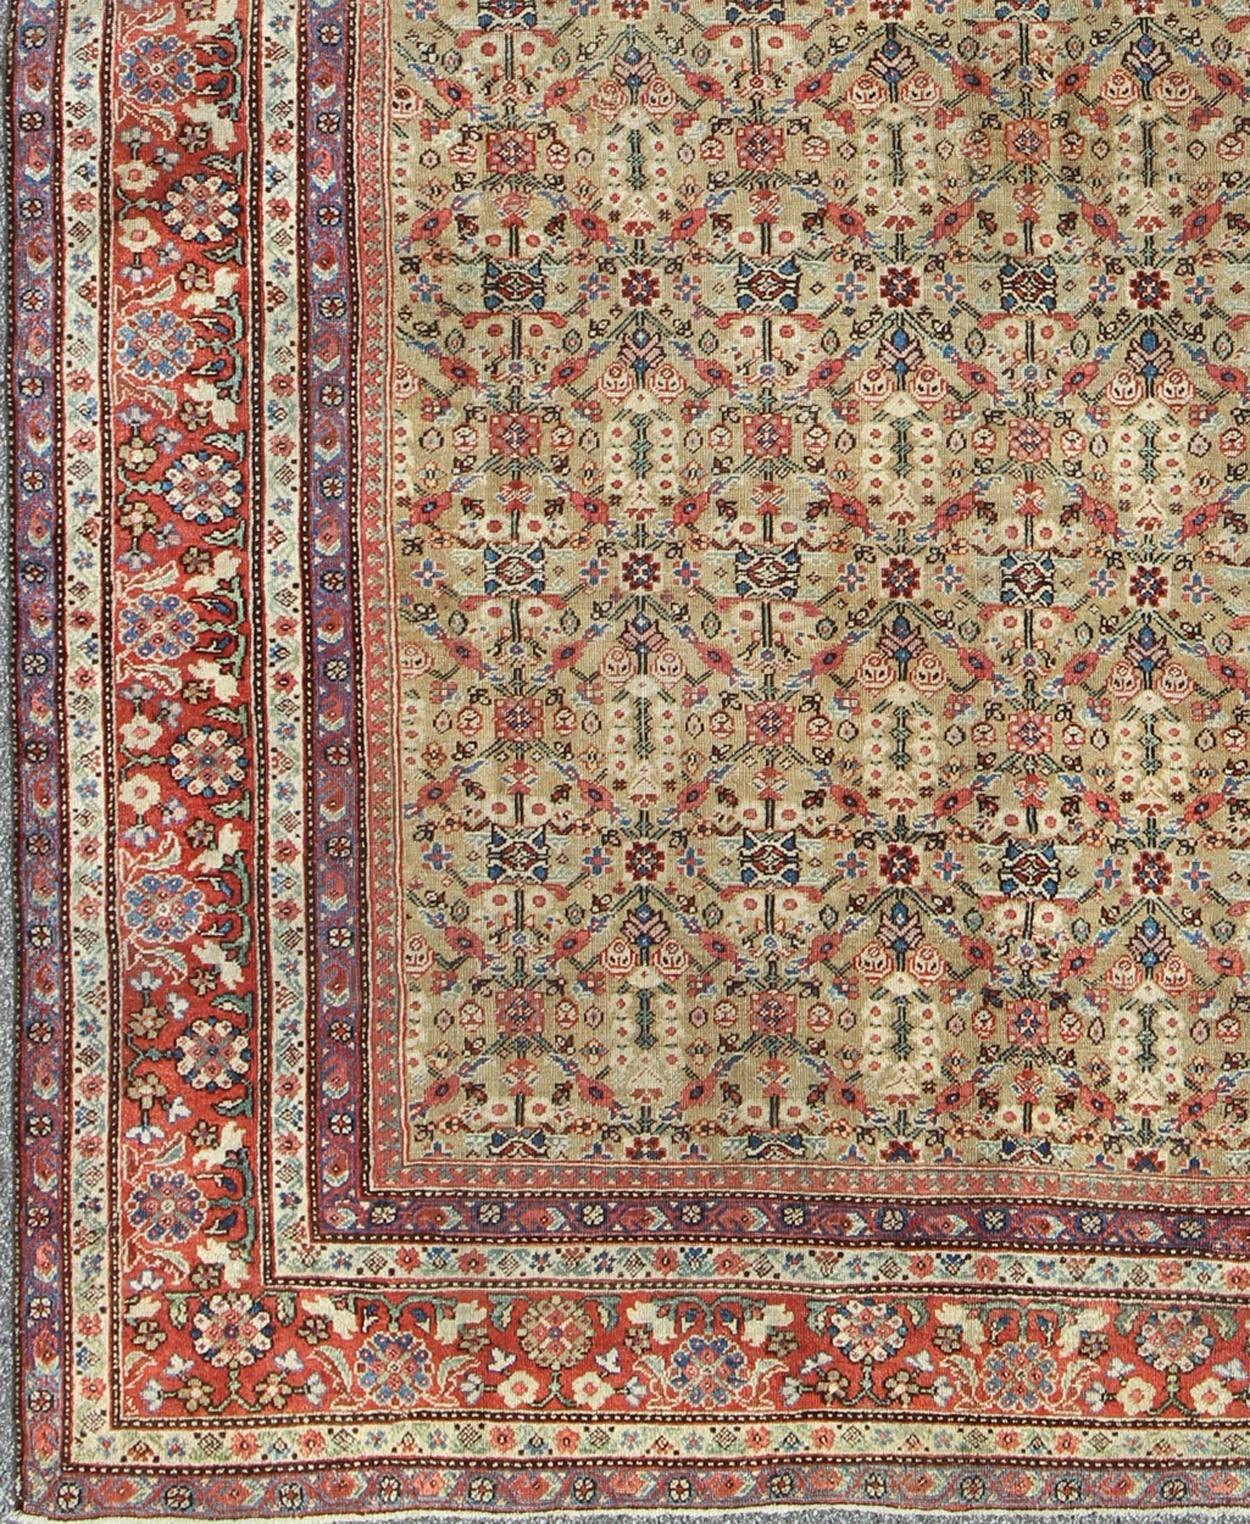 Outstanding Antique Persian Sultanabad Carpet. Keivan Woven Arts / rug /A-0202, country of origin / type: Iran / Sultanabad , circa 1890.

Measures: 9'5 x 12'4

This exquisite Sultanabad from the second half of the nineteenth century incorporates an